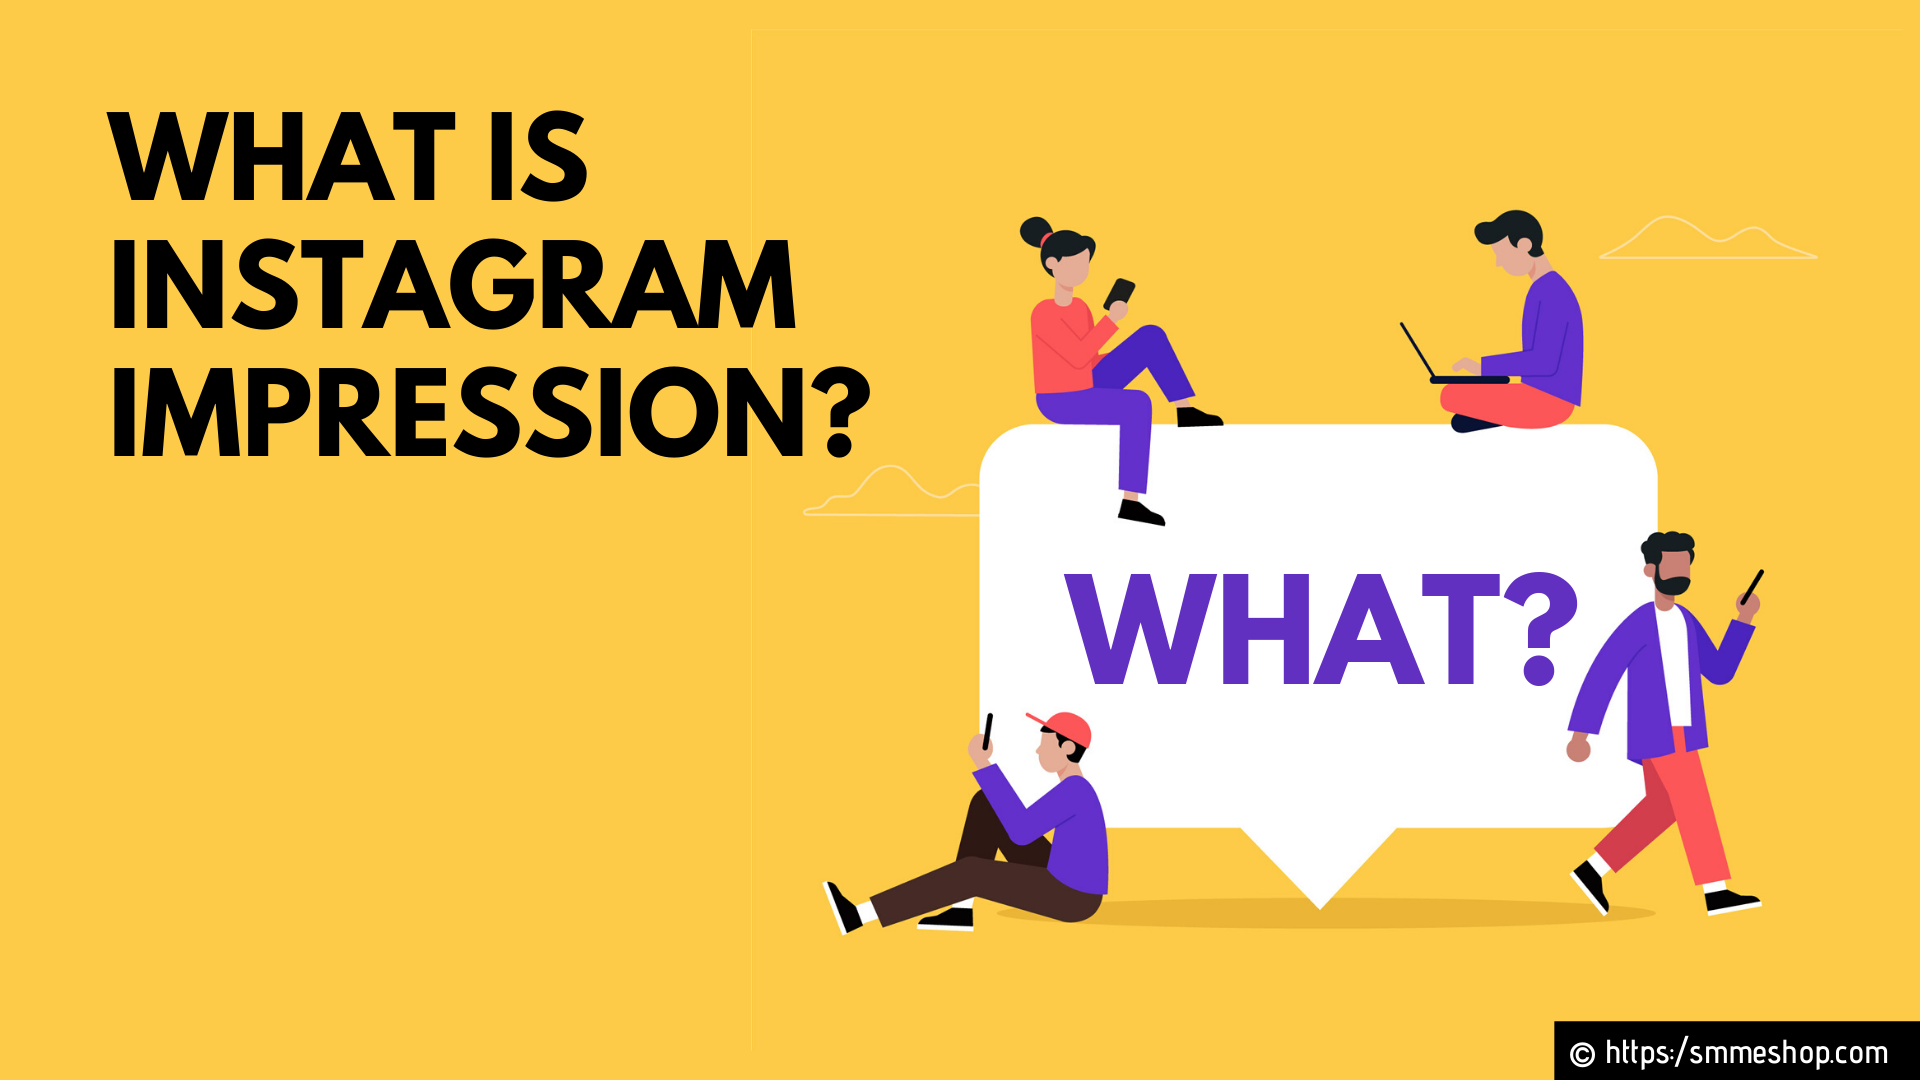 What Is Instagram Impression?